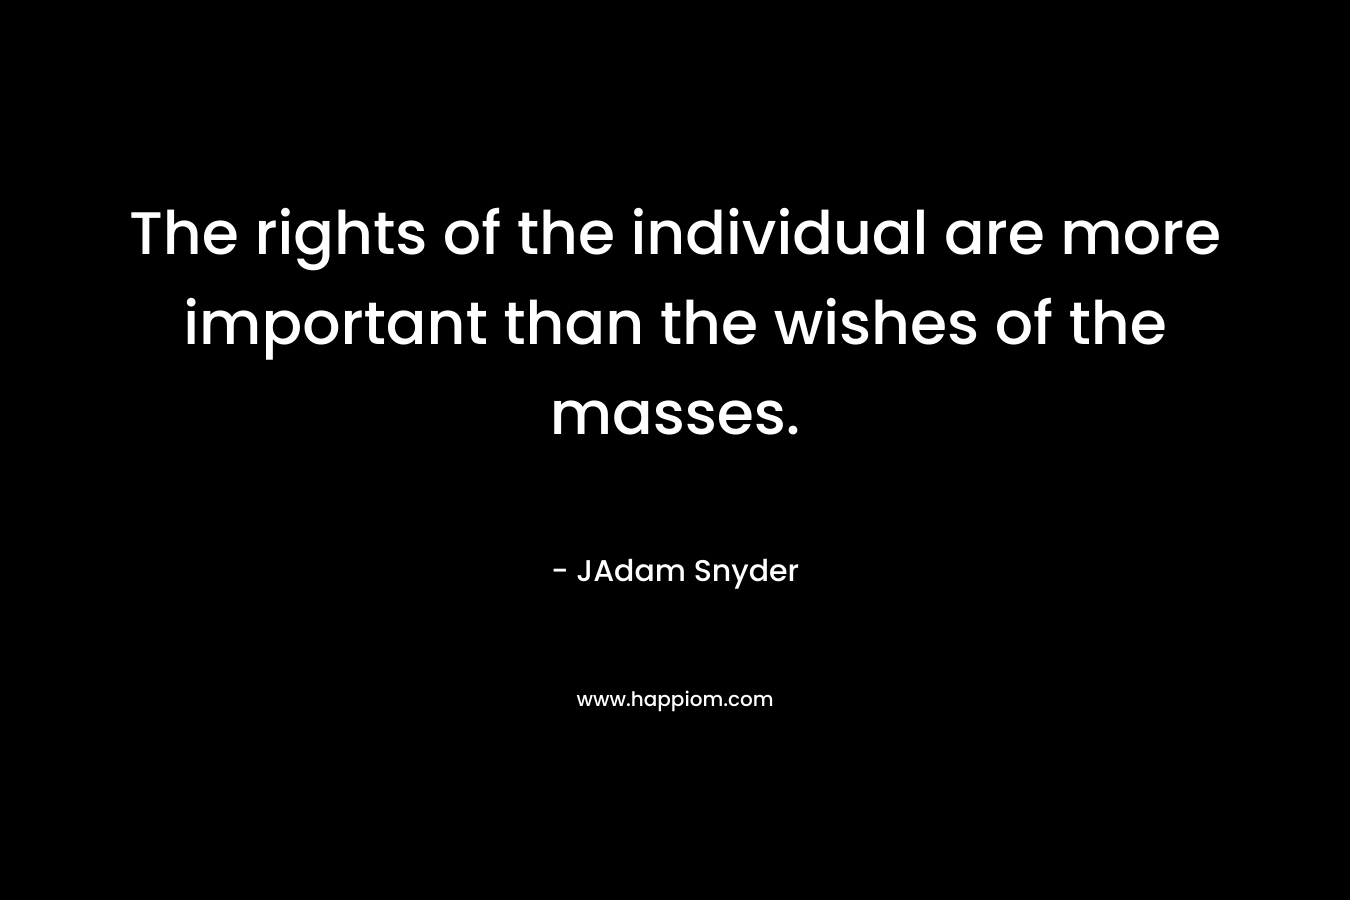 The rights of the individual are more important than the wishes of the masses.